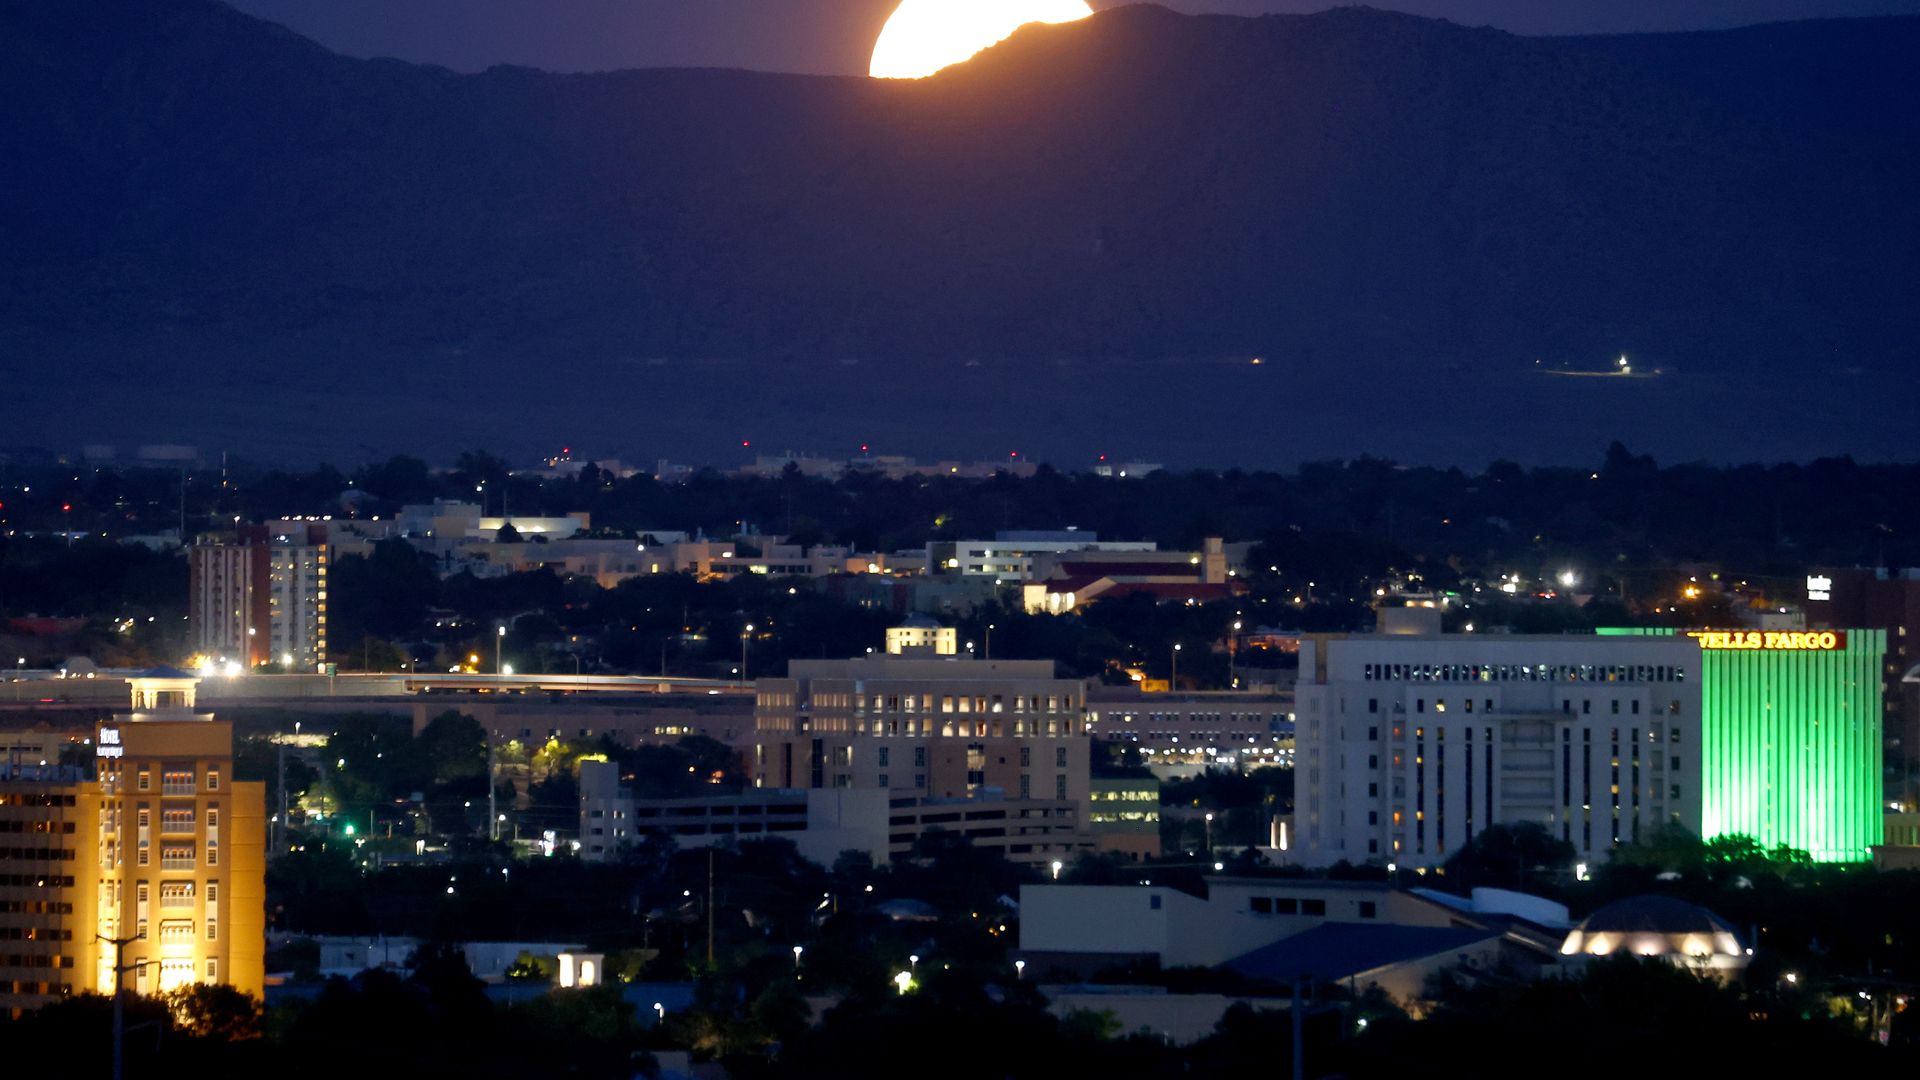 The Sturgeon Moon rises beyond the city on August 11, 2022 in Albuquerque, New Mexico.